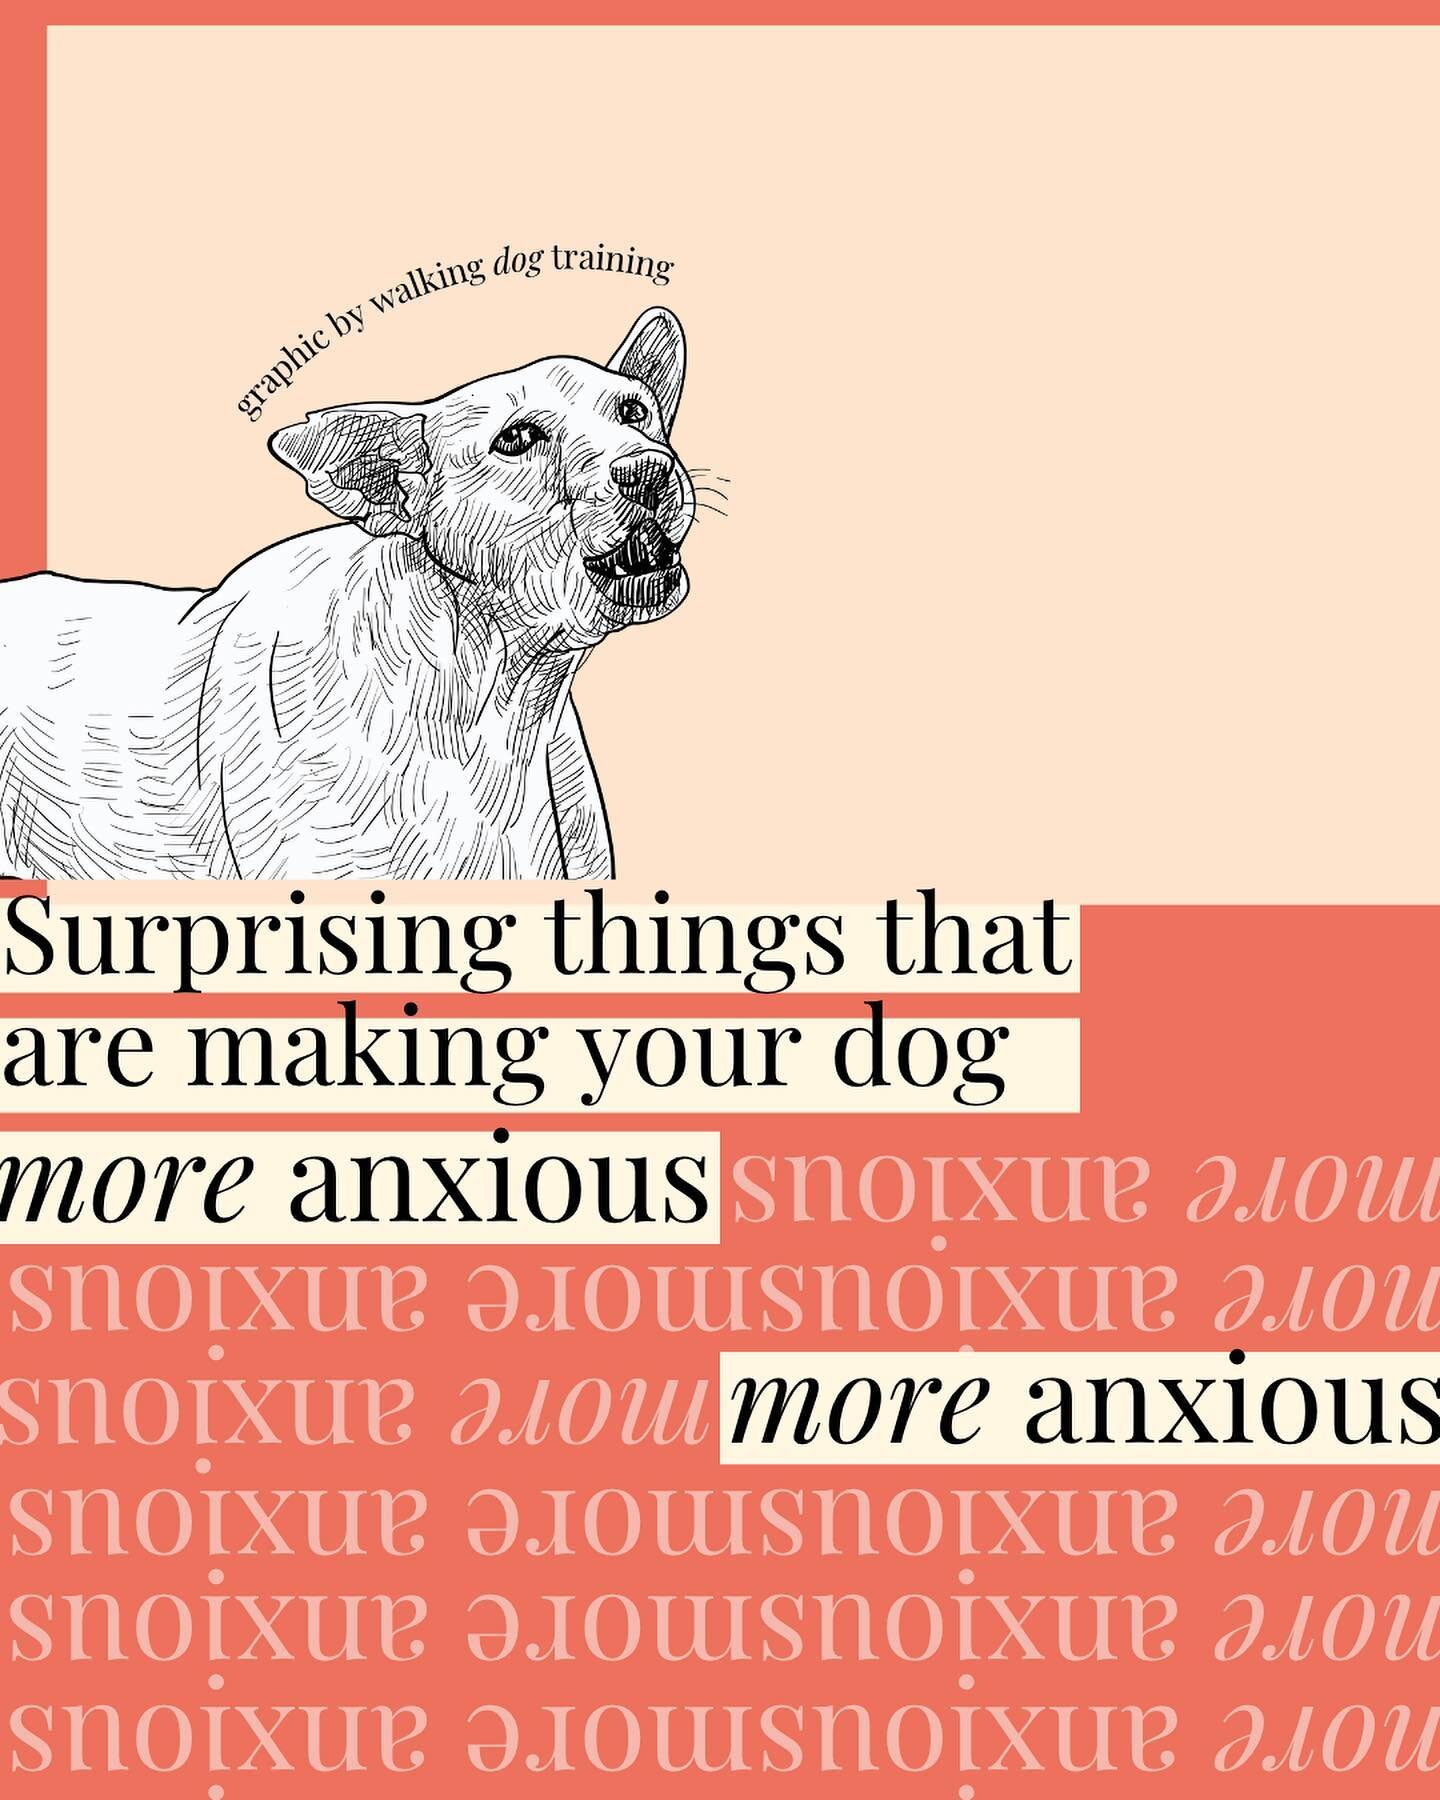 Do these surprise you?
.
Have you tried changing any of these things and saw a difference?
.
I would love to know! It&rsquo;s always so interesting hearing from you &hearts;️
.
.
.
.
.
.
.
#dogtraining #dogtrainingtips #separationanxiety